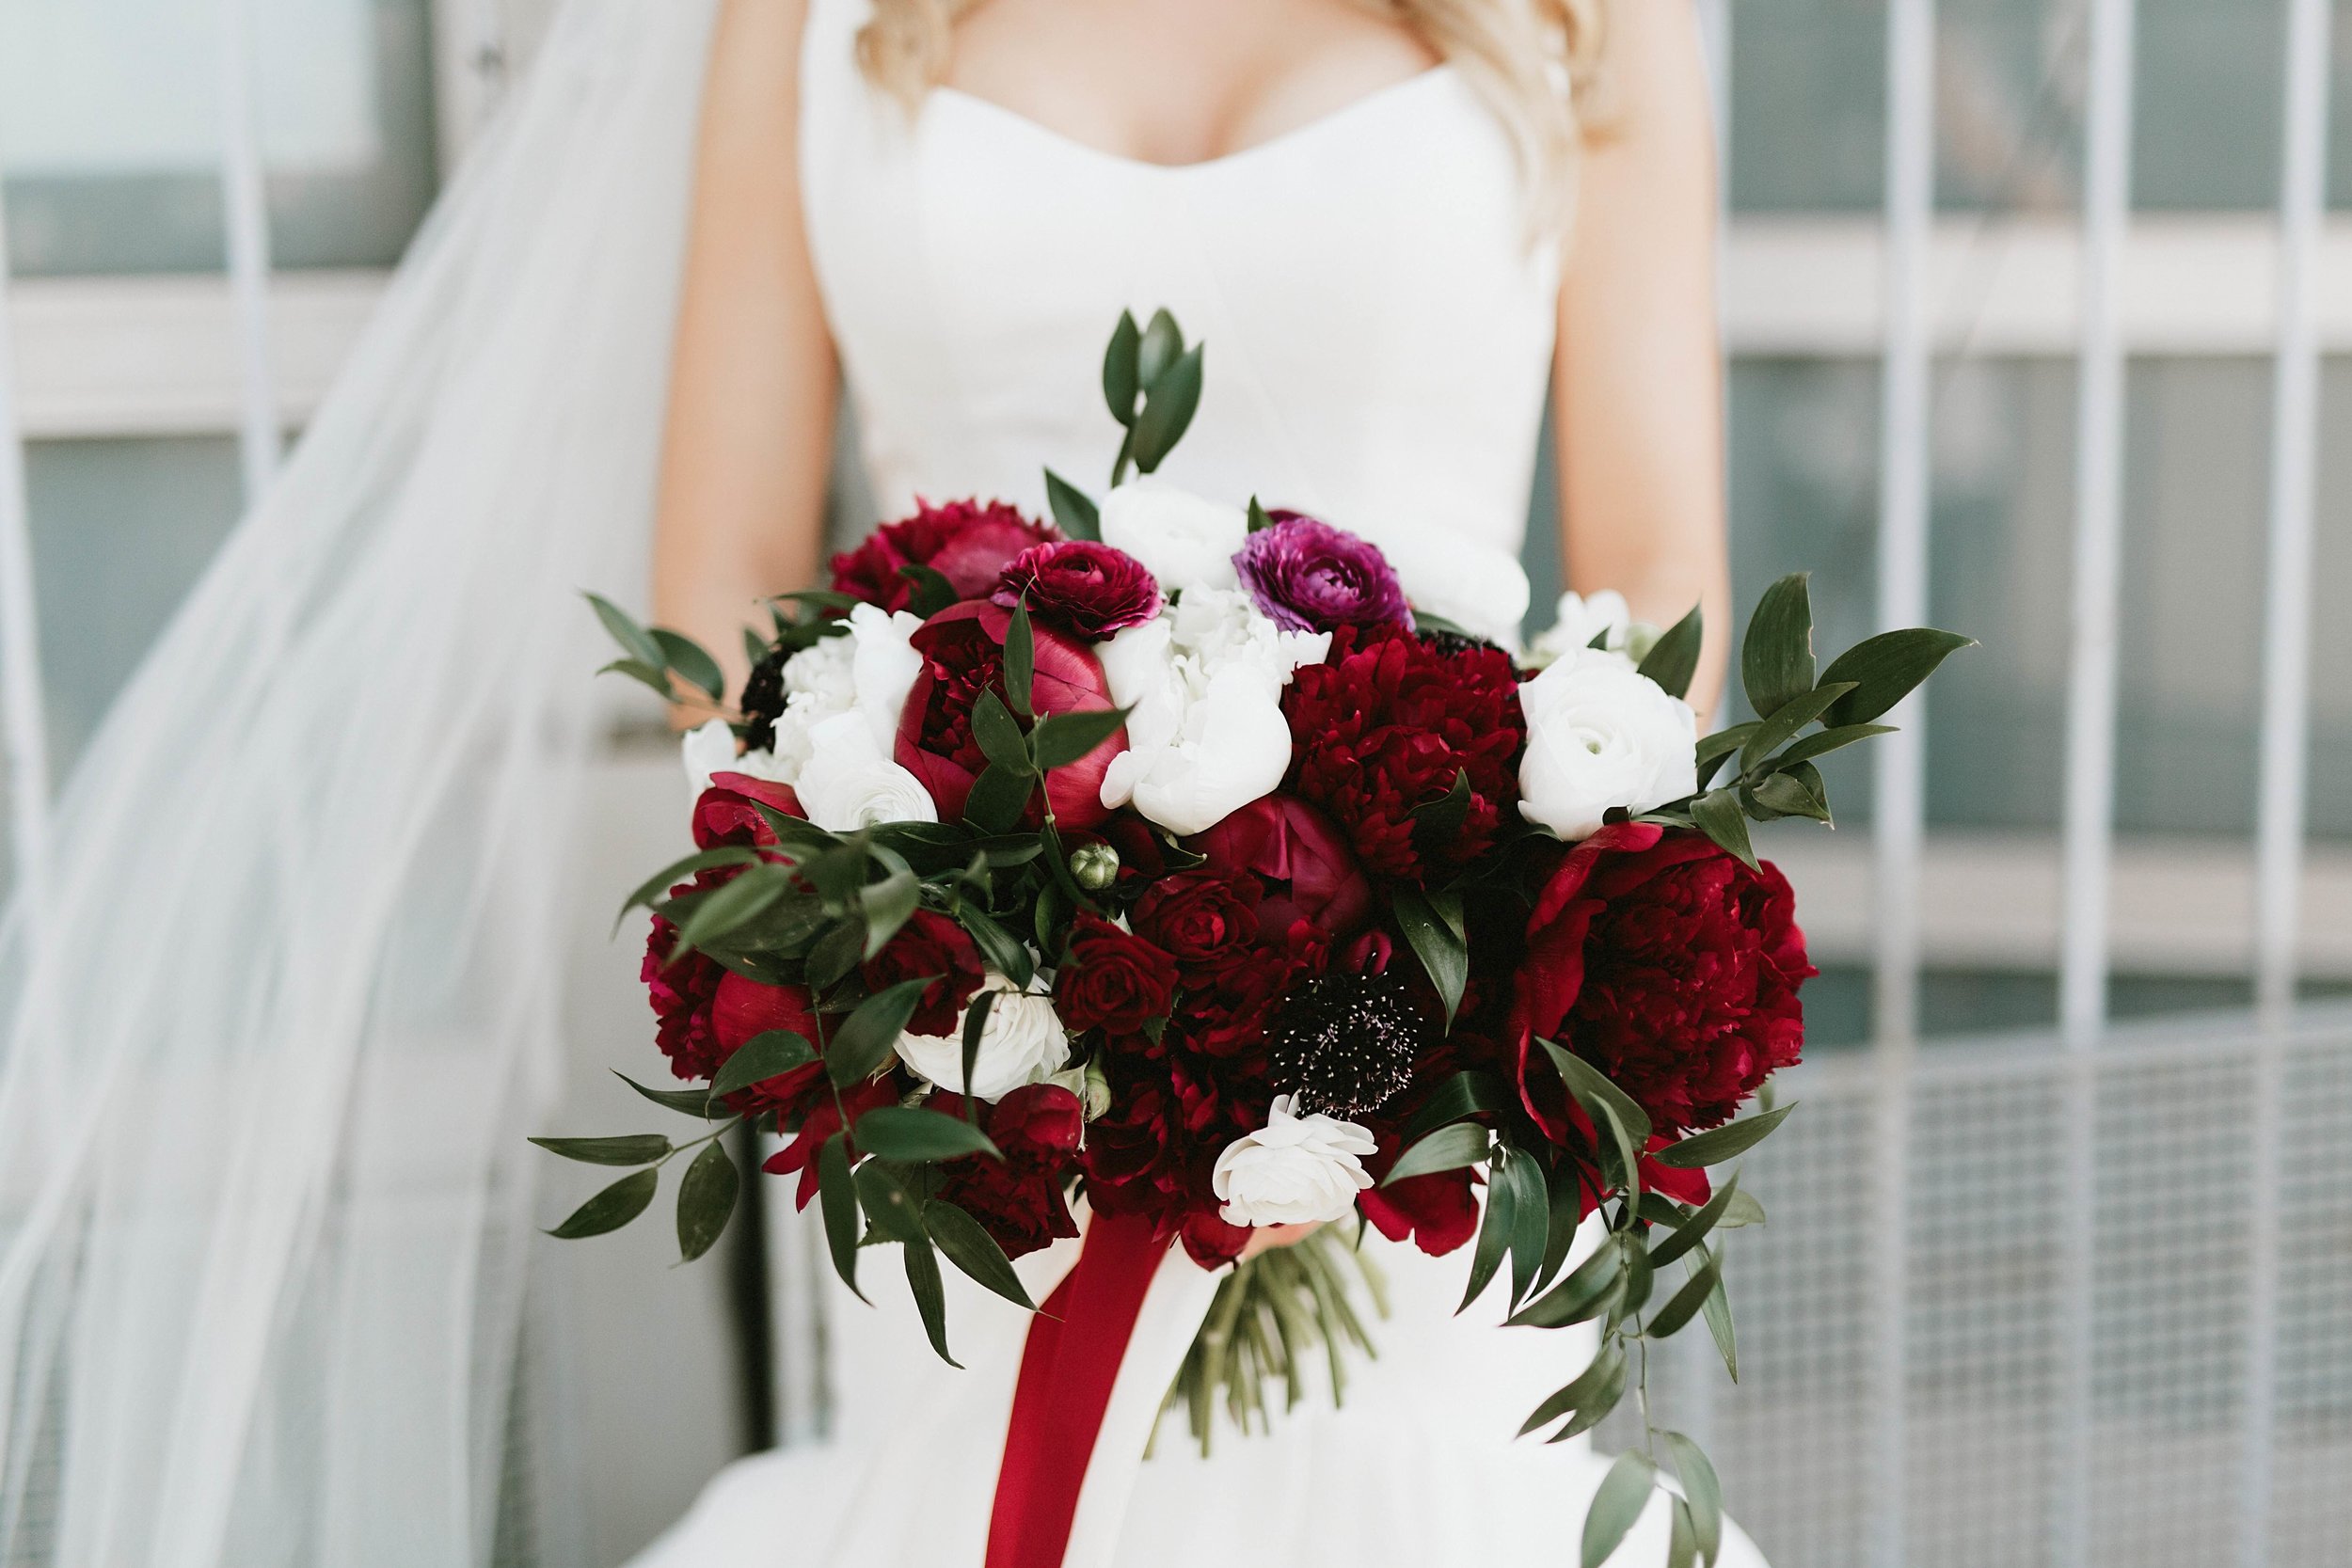 A Bride holding a bouquet at her wedding